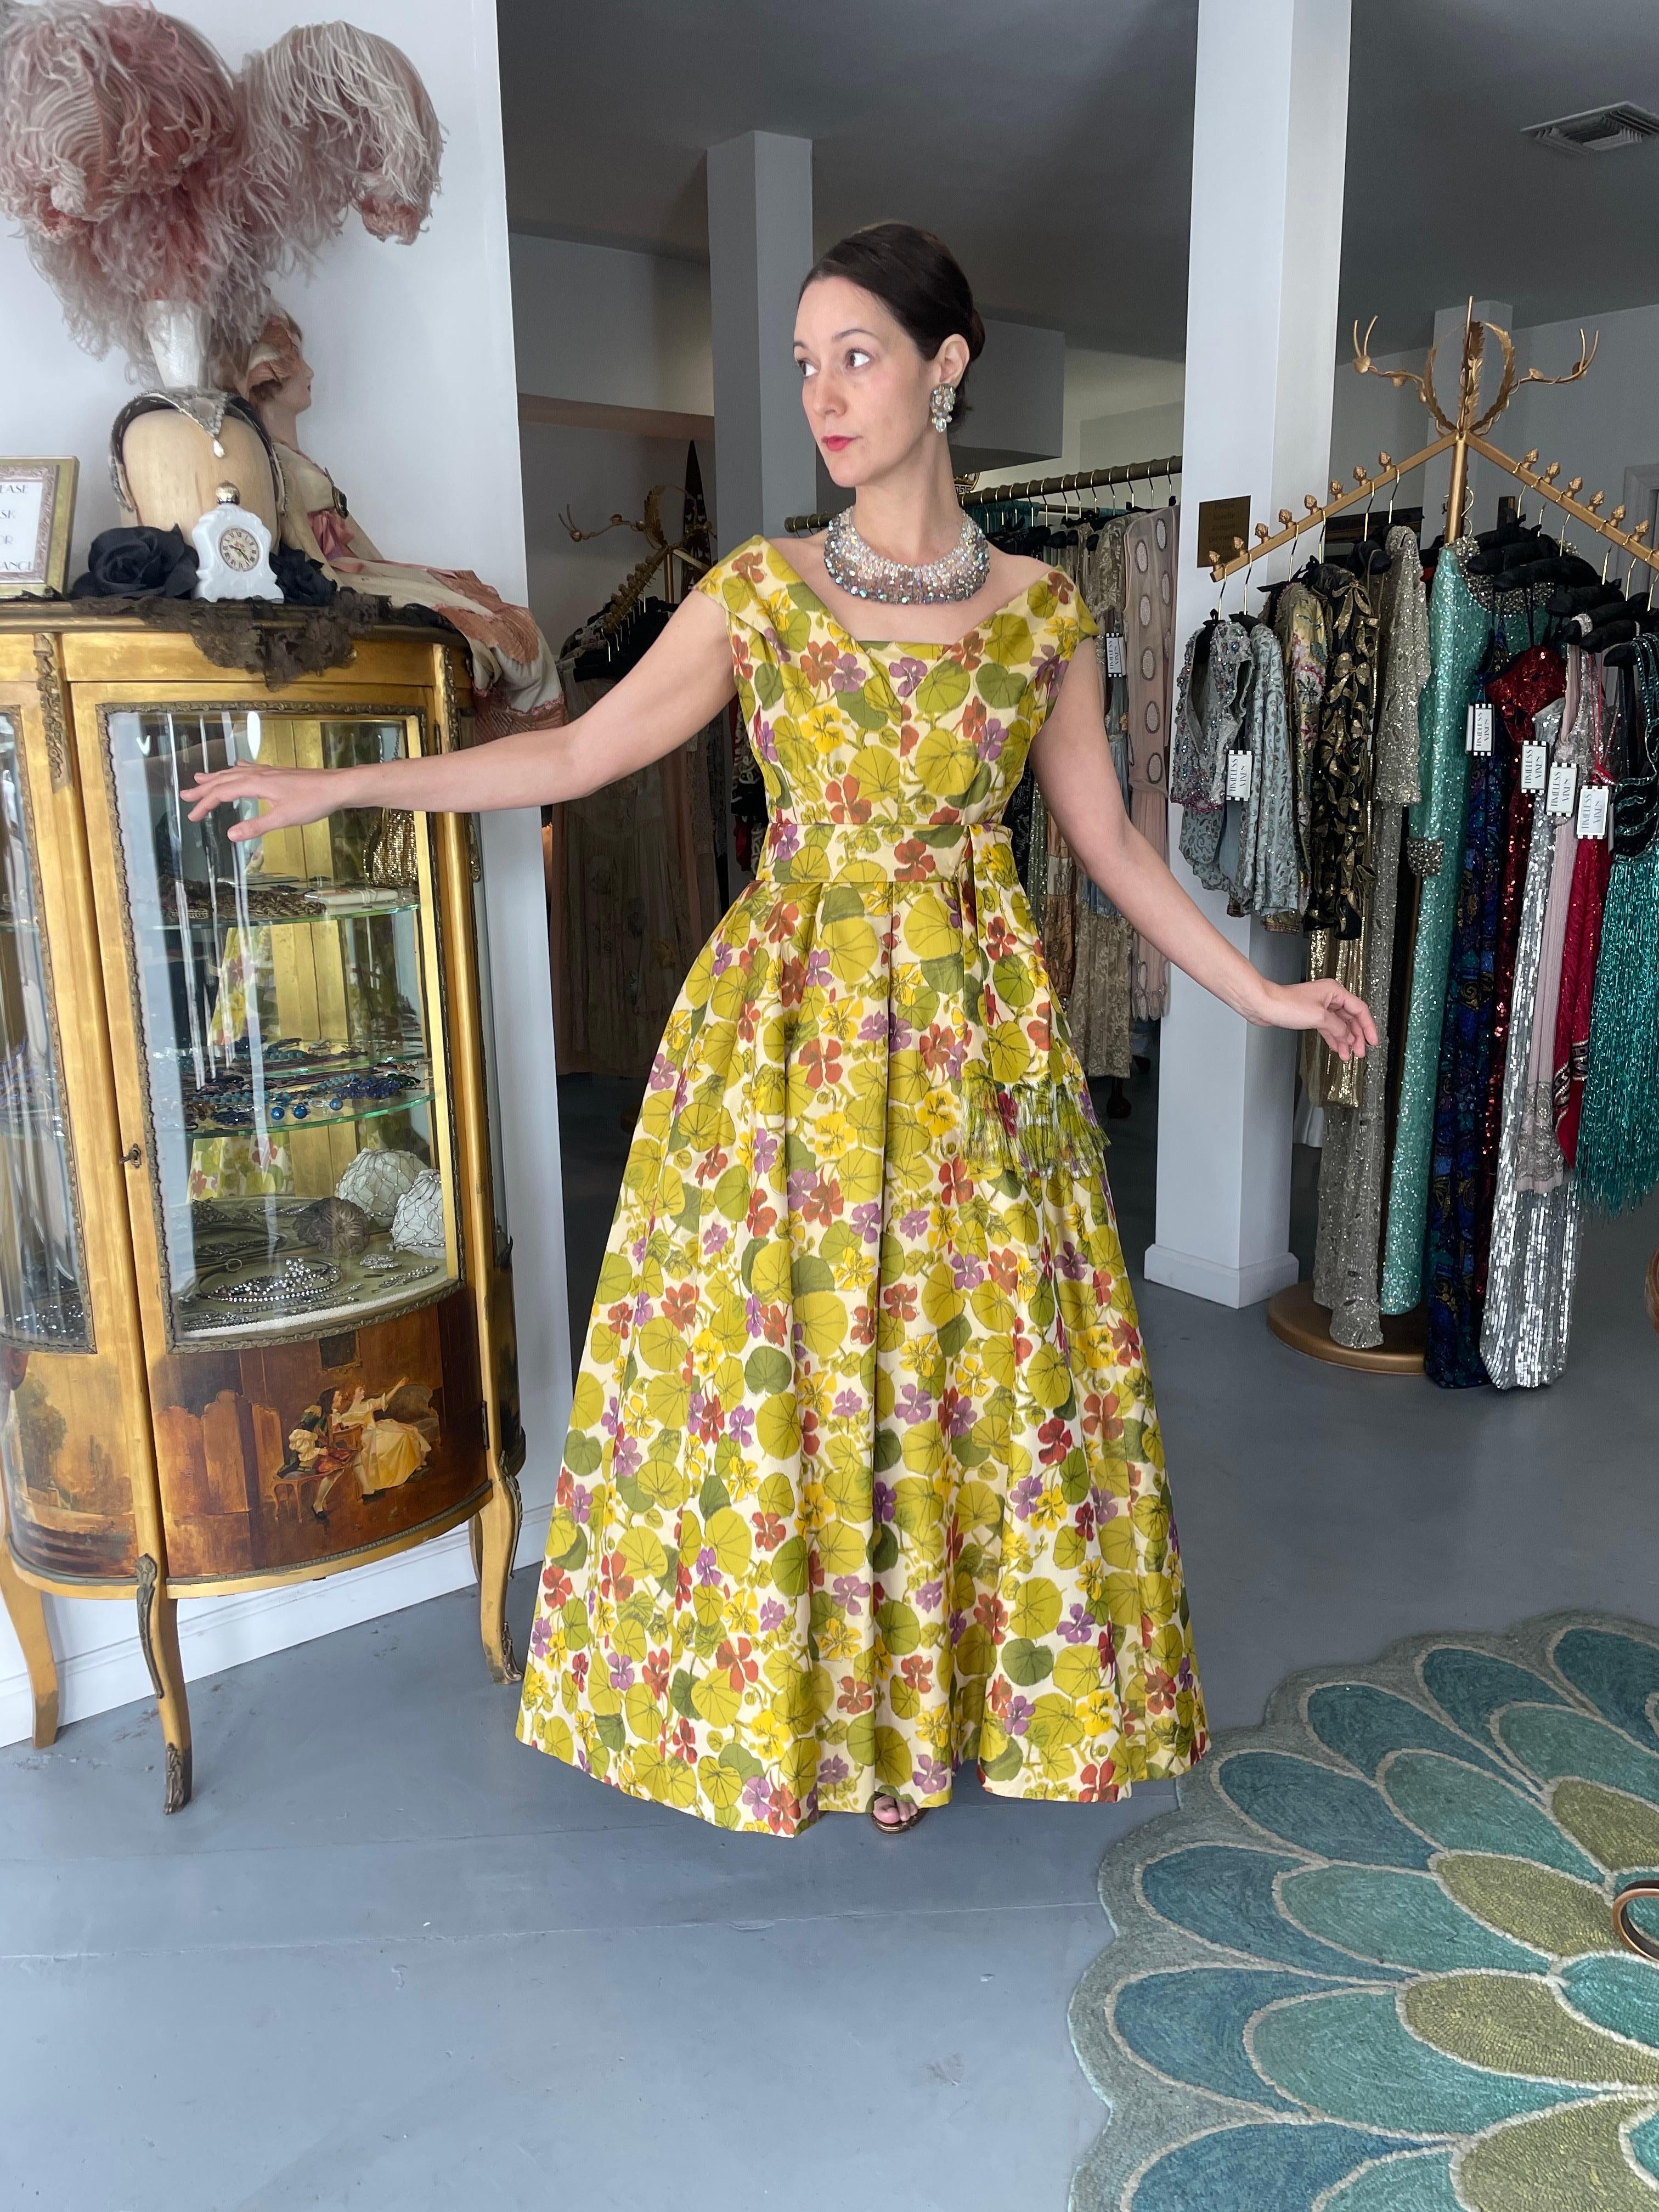 An exceptionally rare and highly coveted Jeanne Lanvin Castillo haute couture watercolor floral gown dating back to the early 1950's. According to two fashion experts, this designer label with the red 'Paris' was used from 1945 through 1954.